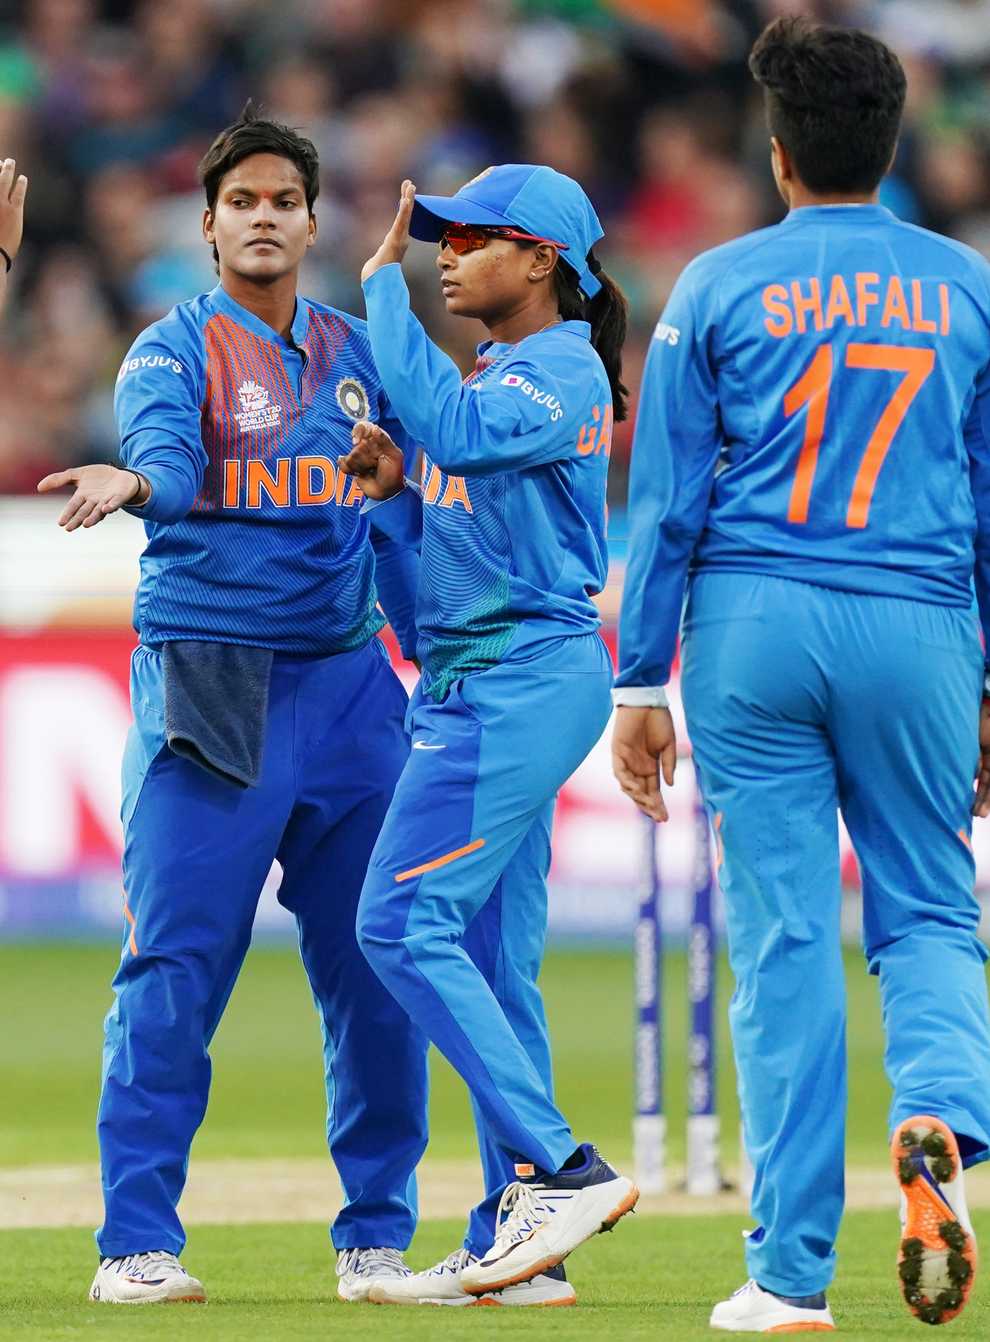 India women's cricket team are unable to play in the tri-series